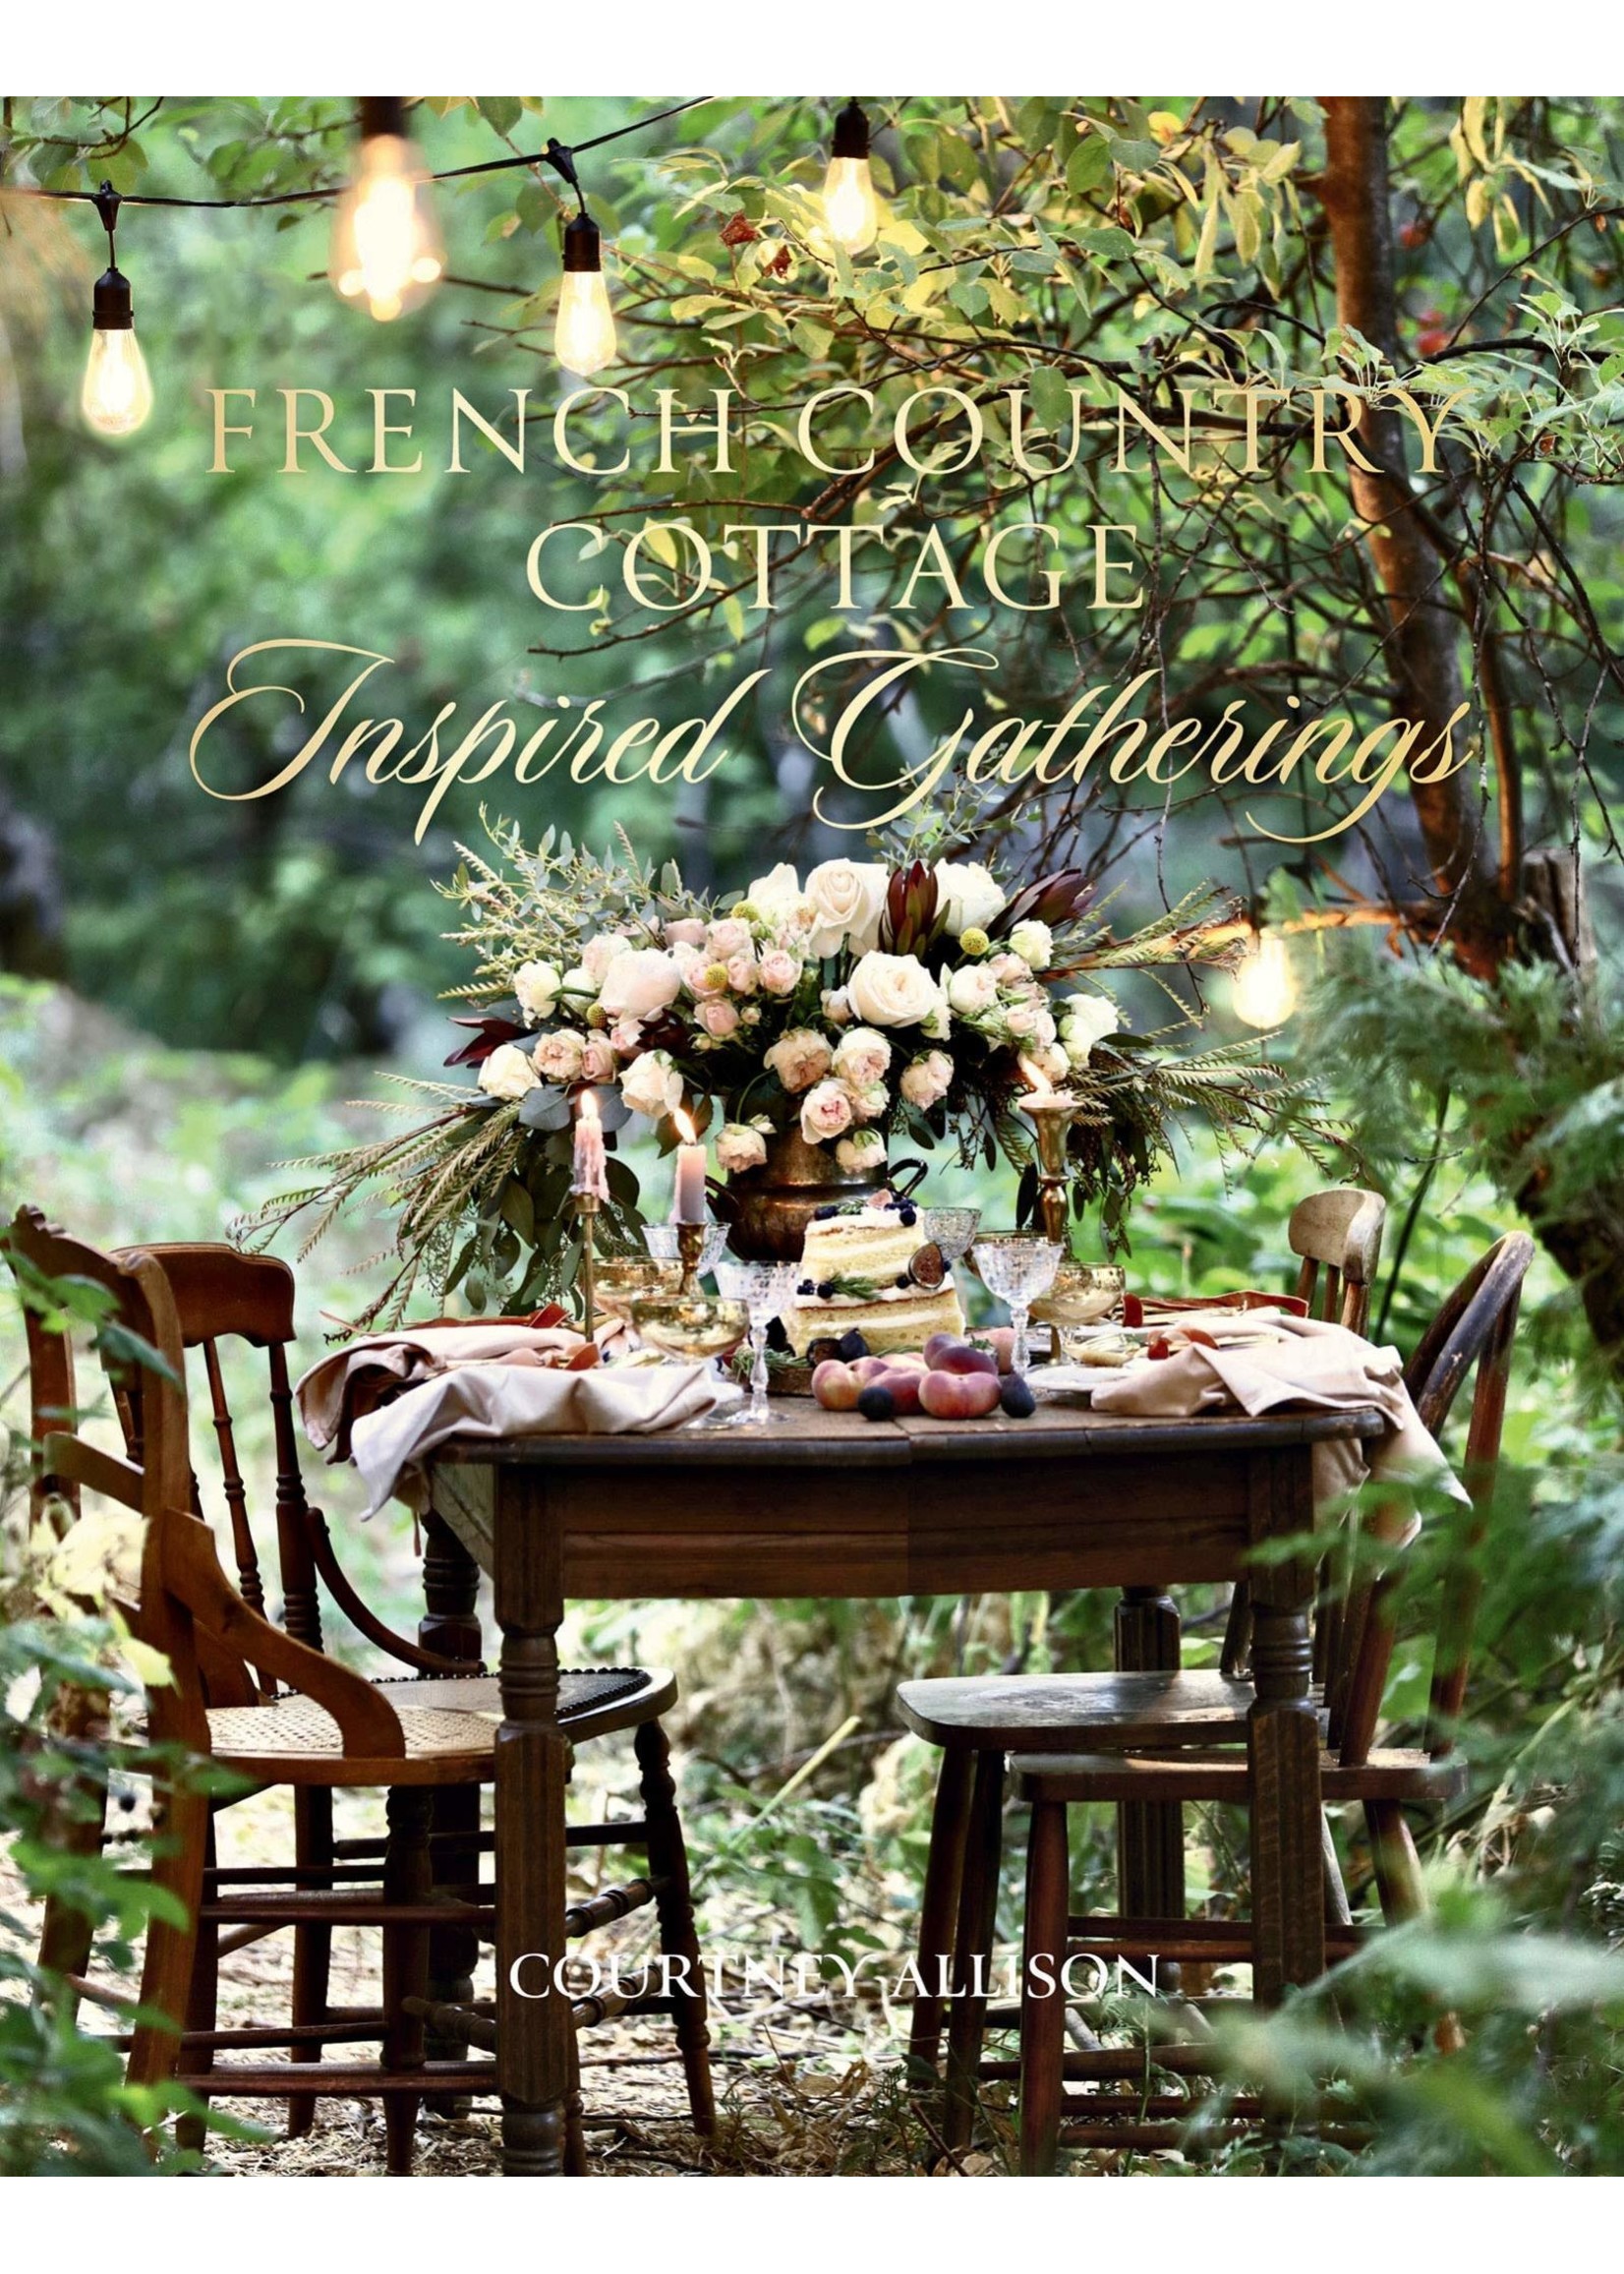 Book - French Country Cottage - Inspired Gatherings